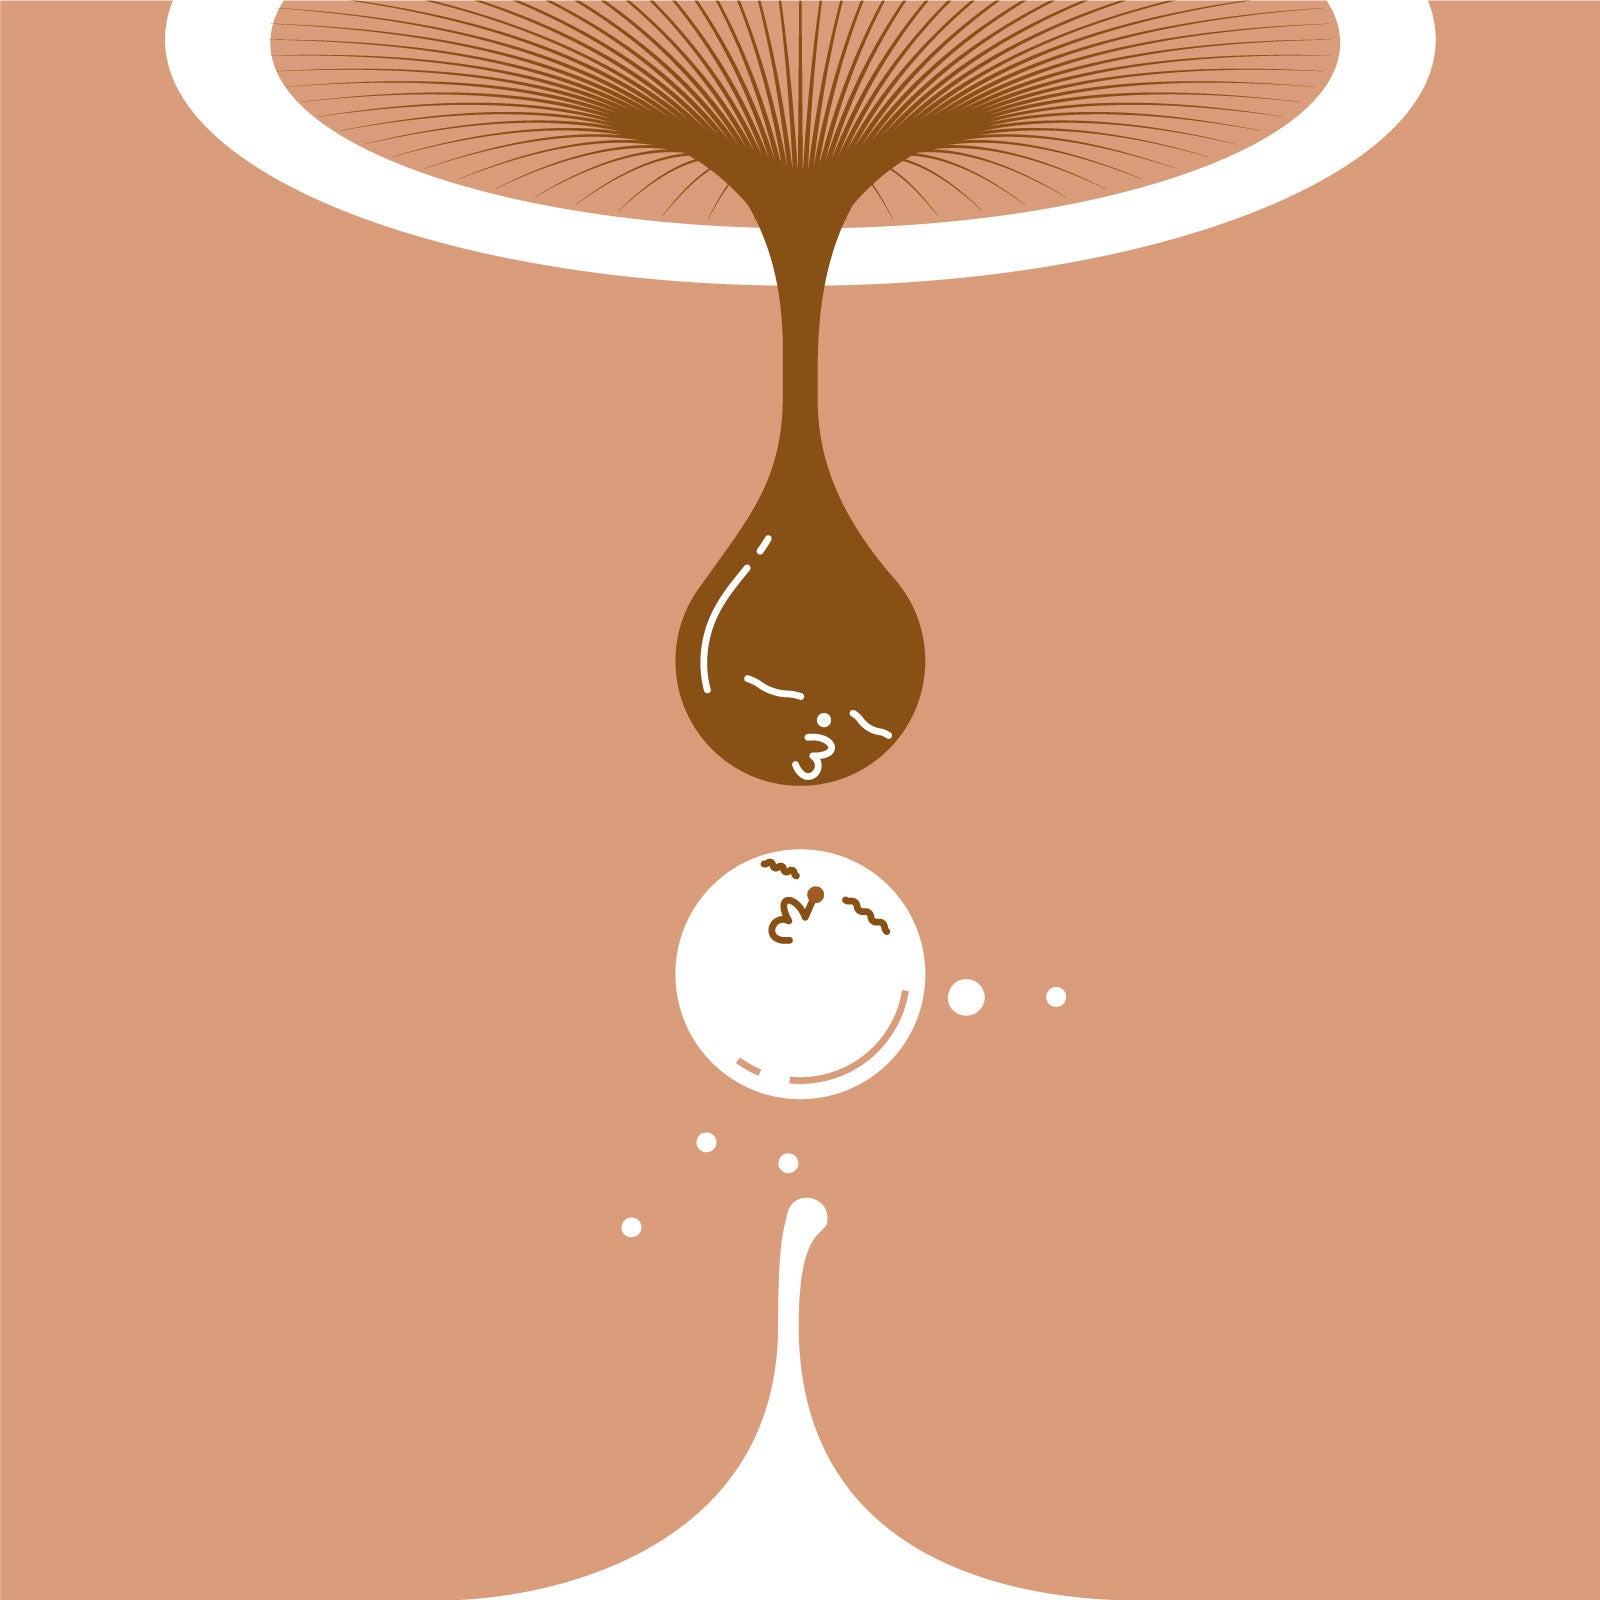 Illustration of a drop of espresso lovingly anticipating to meet with a drop of milk